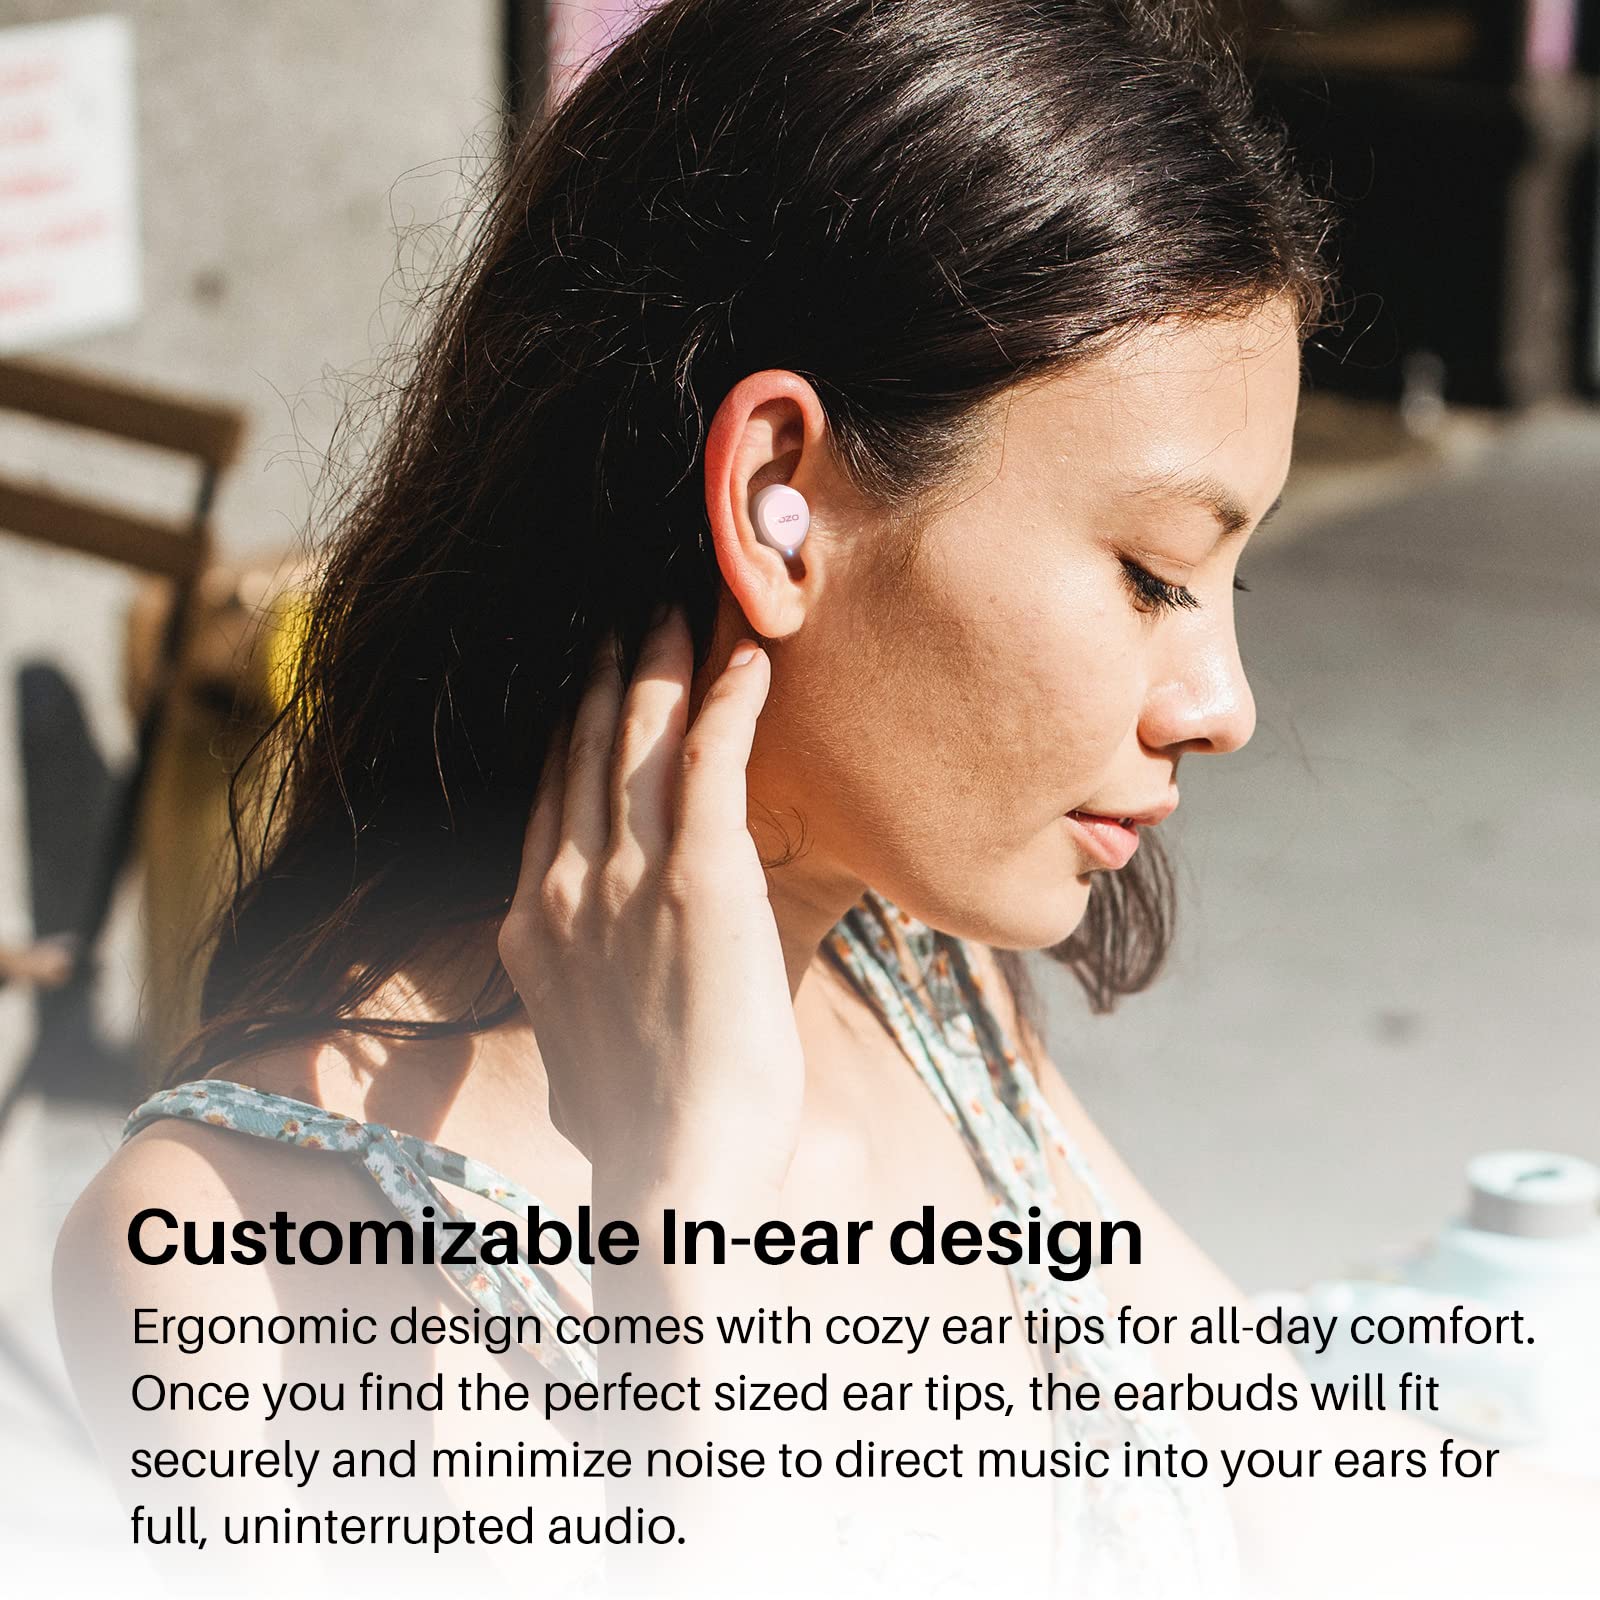 TOZO A1 Mini Wireless Earbuds Bluetooth 5.3 in Ear Light-Weight Headphones Built-in Microphone, IPX5 Waterproof, Immersive Premium Sound Long Distance Connection Headset with Charging Case, Rose Gold